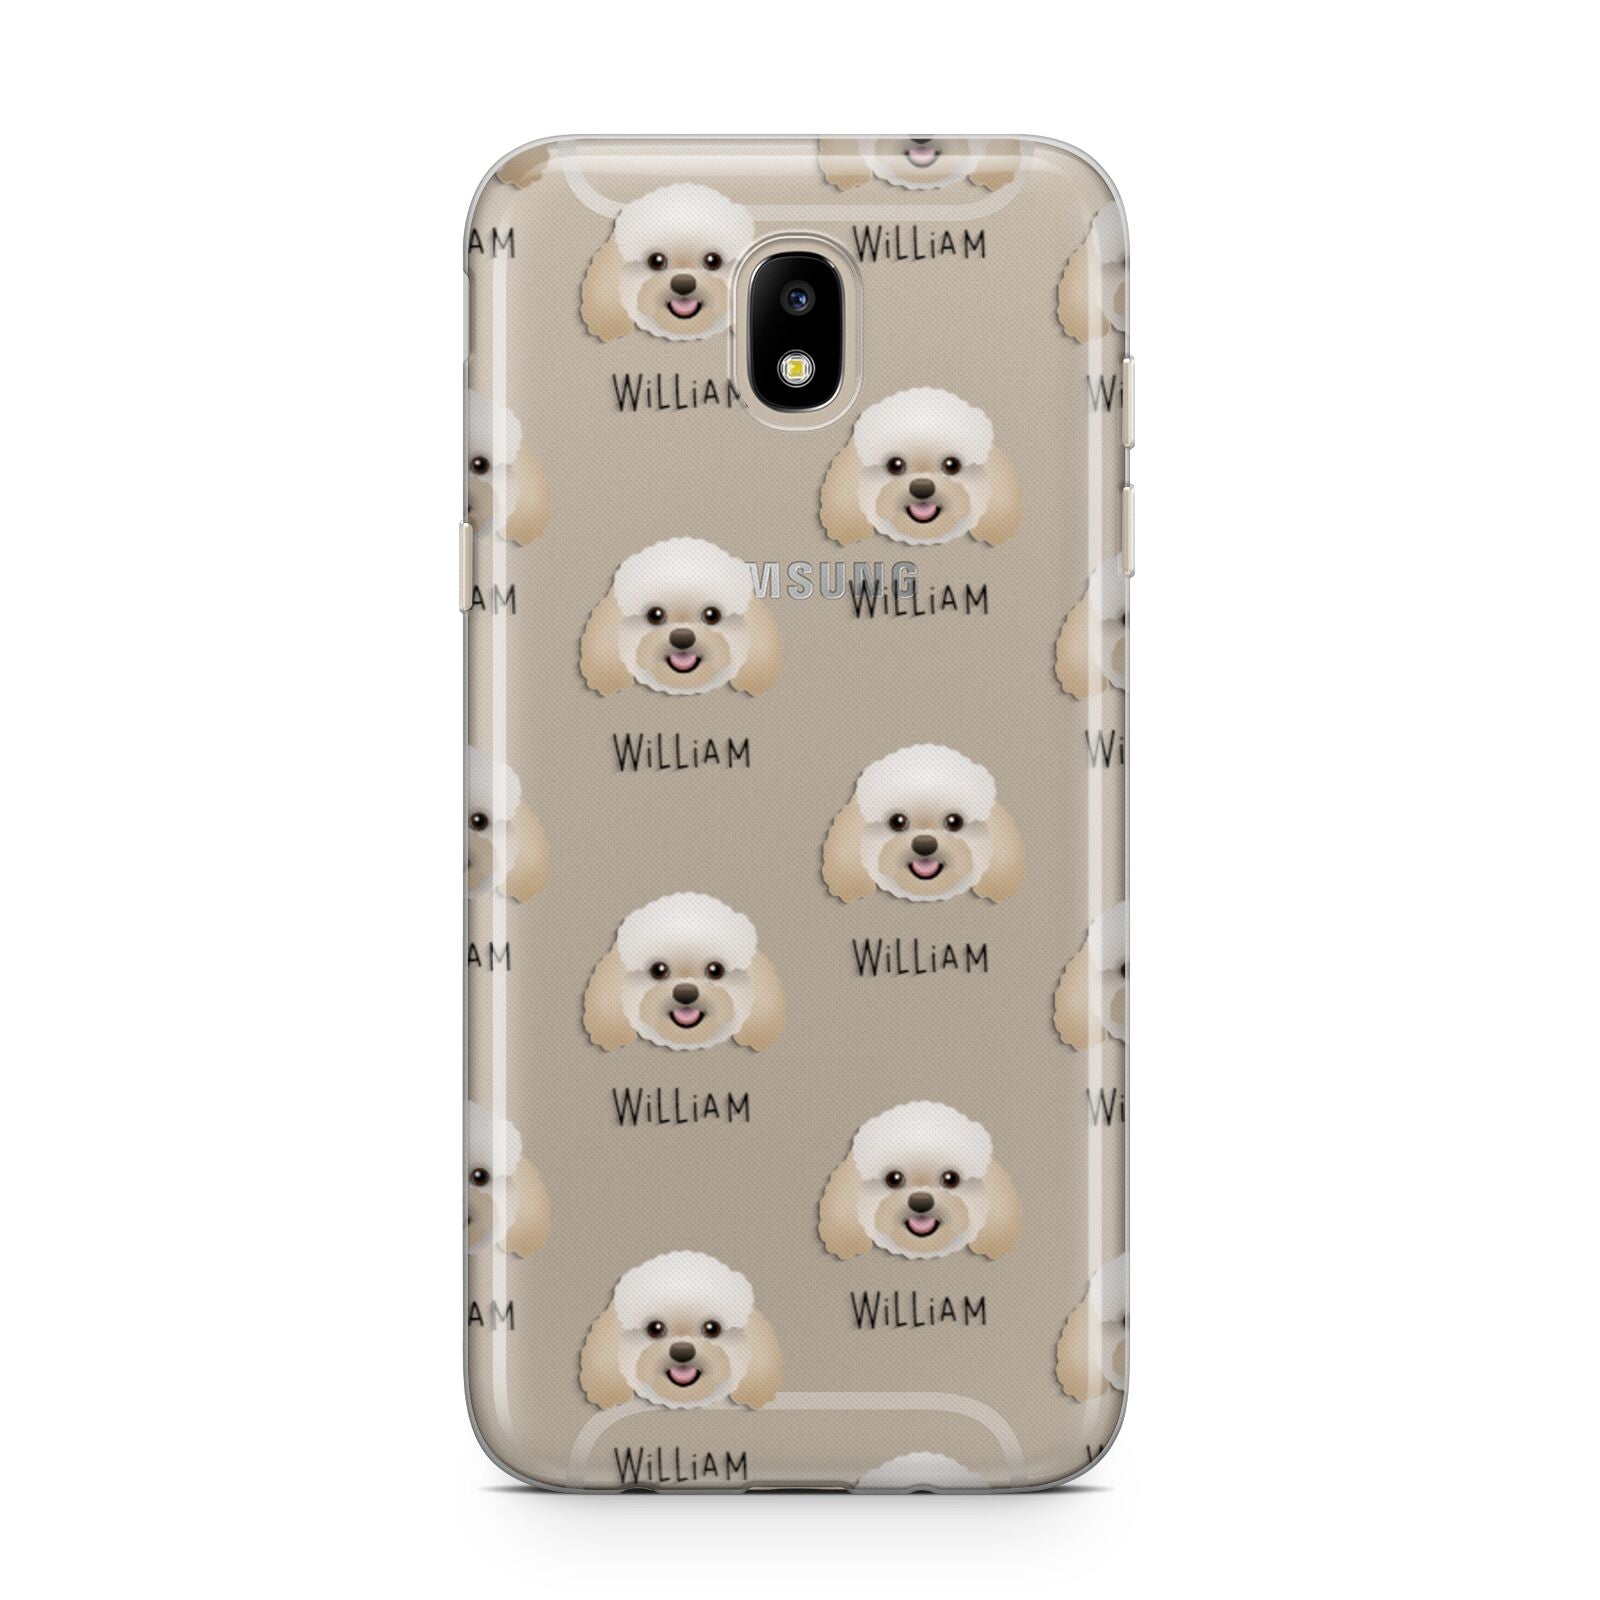 Bich poo Icon with Name Samsung J5 2017 Case